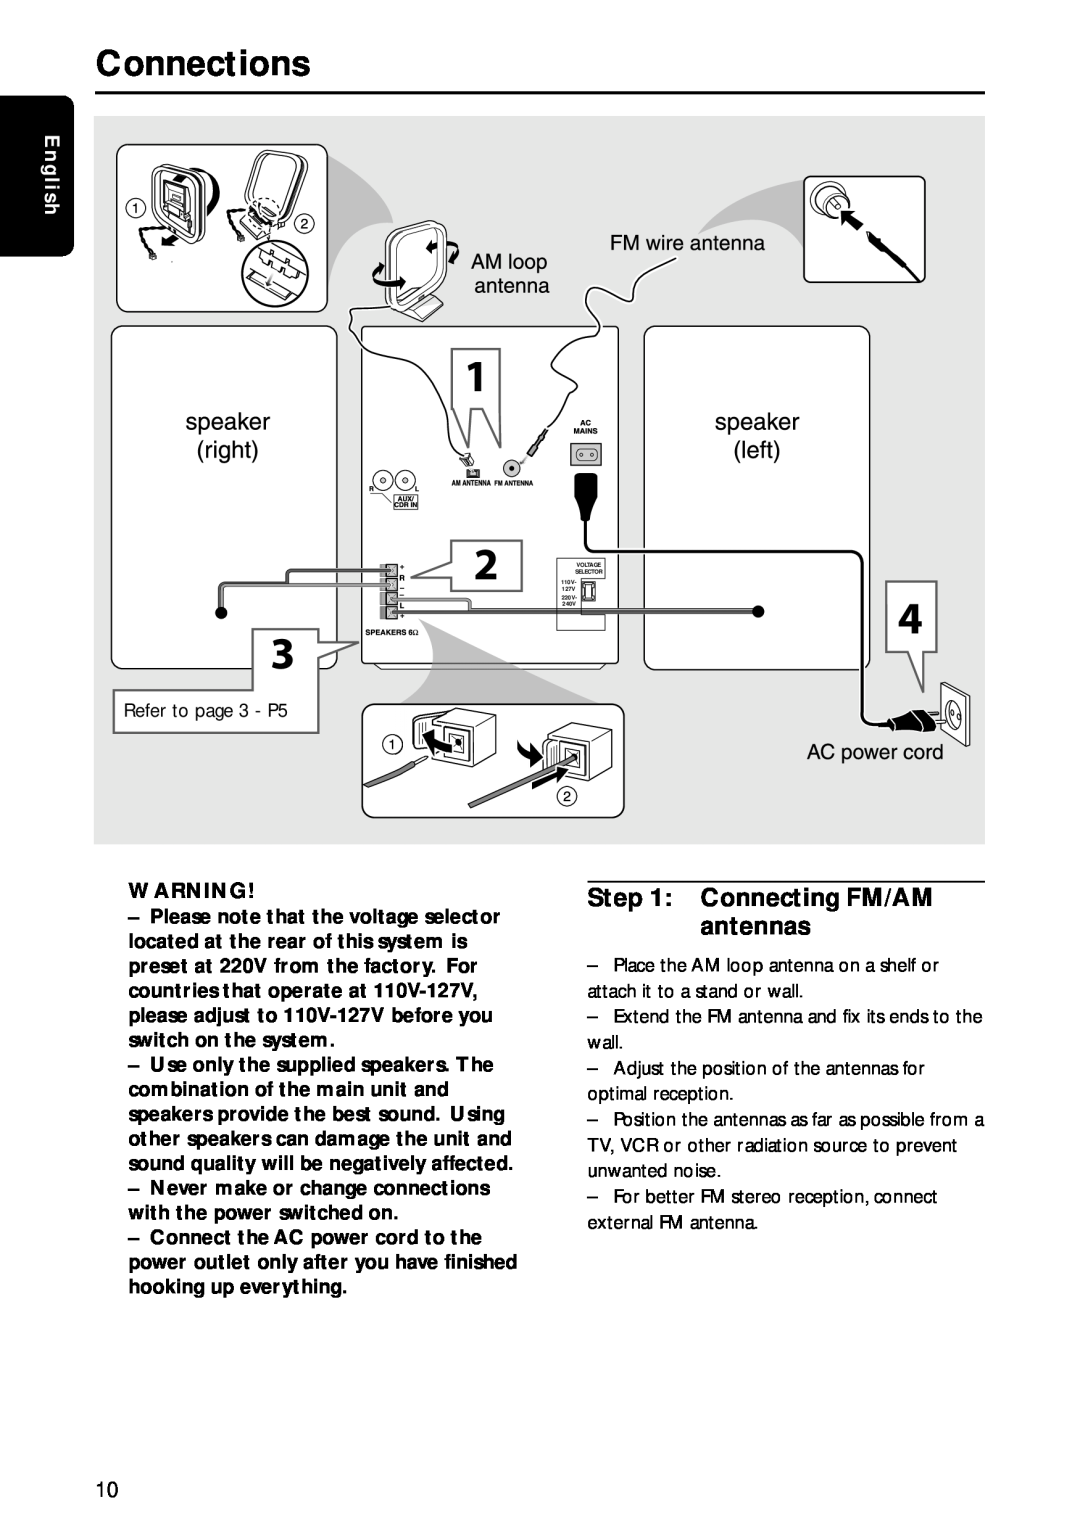 Philips MC M570 manual Connections, Connecting FM/AM antennas, English 